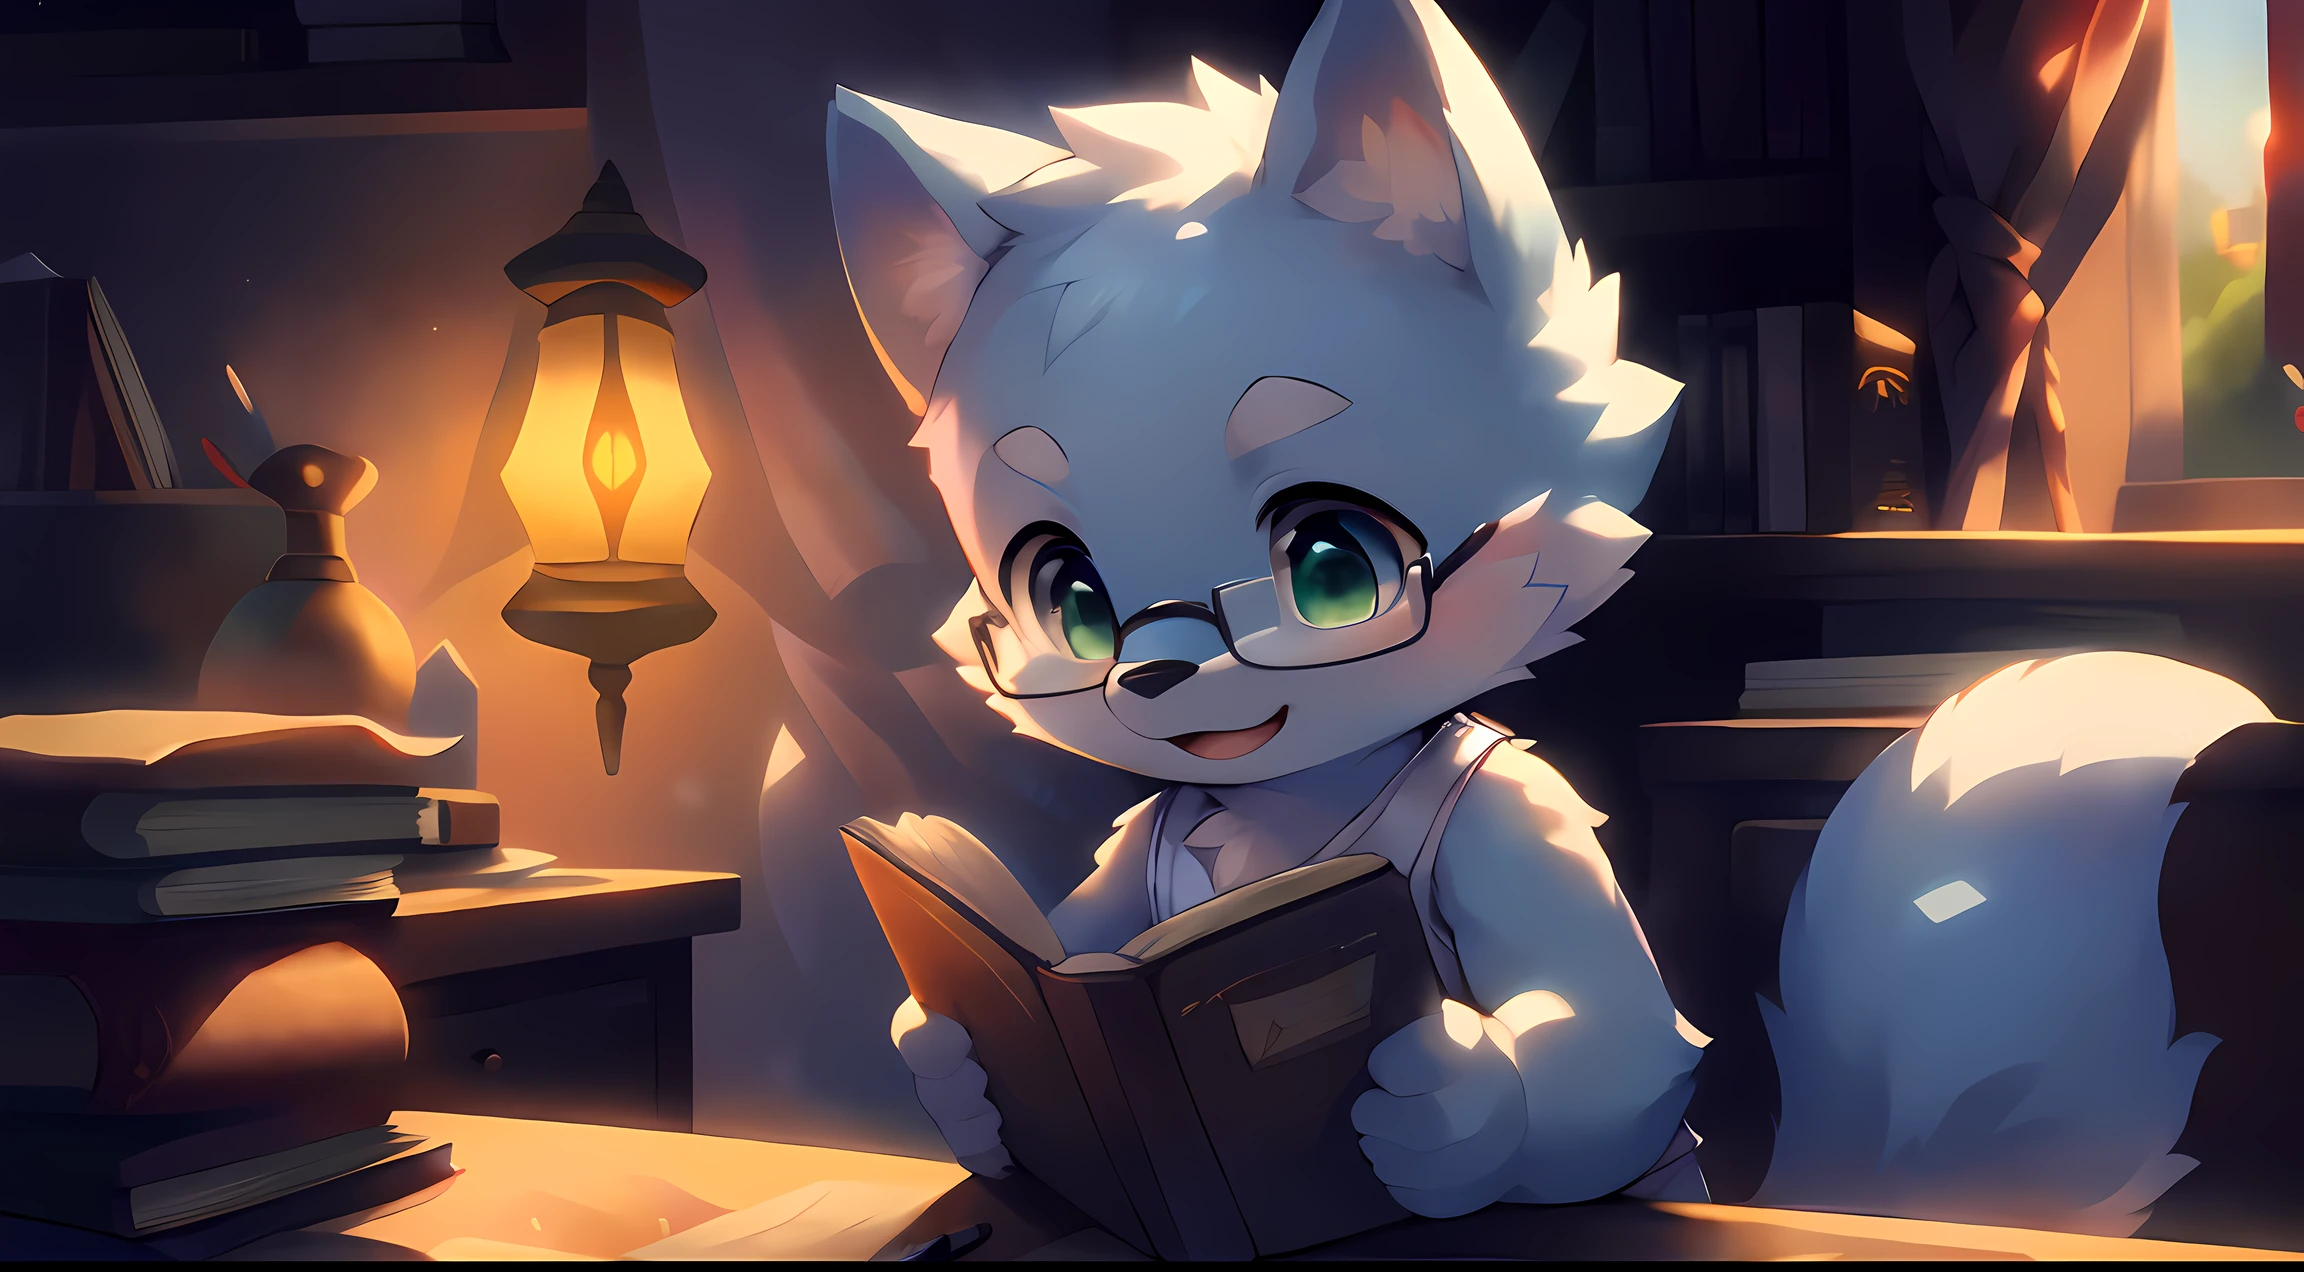 masterpiece, best quality, highly detailed, sfw, 1boy, (sitting at desk, studying, reading:1.25), (upper body:1.25), (morning, sun light, brightness:1.5), (bedroom, book, desk:1.25), (kemono), (shota, toddler:1.25), (cub:1.25), (solo:2.0), cute, kawaii, (wolf:1.2), light blue fur, light blue face, (bald:0.25), detailed green eyes, (thick eyebrows), light blue body, light blue arms, light blue hands, light blue tail, (4 fingers:0.25), (chest tuft:0.1), detailed, (black glasses), (white tank top), detailed background, (bedroom, book, desk, paper, pen, lamp:1.25), Acoustic Guitar, warm, cozy, focus, Chill, Playful, Relaxed, Cozy, Lazy, Affectionate, Curious, Comforting, Cute,